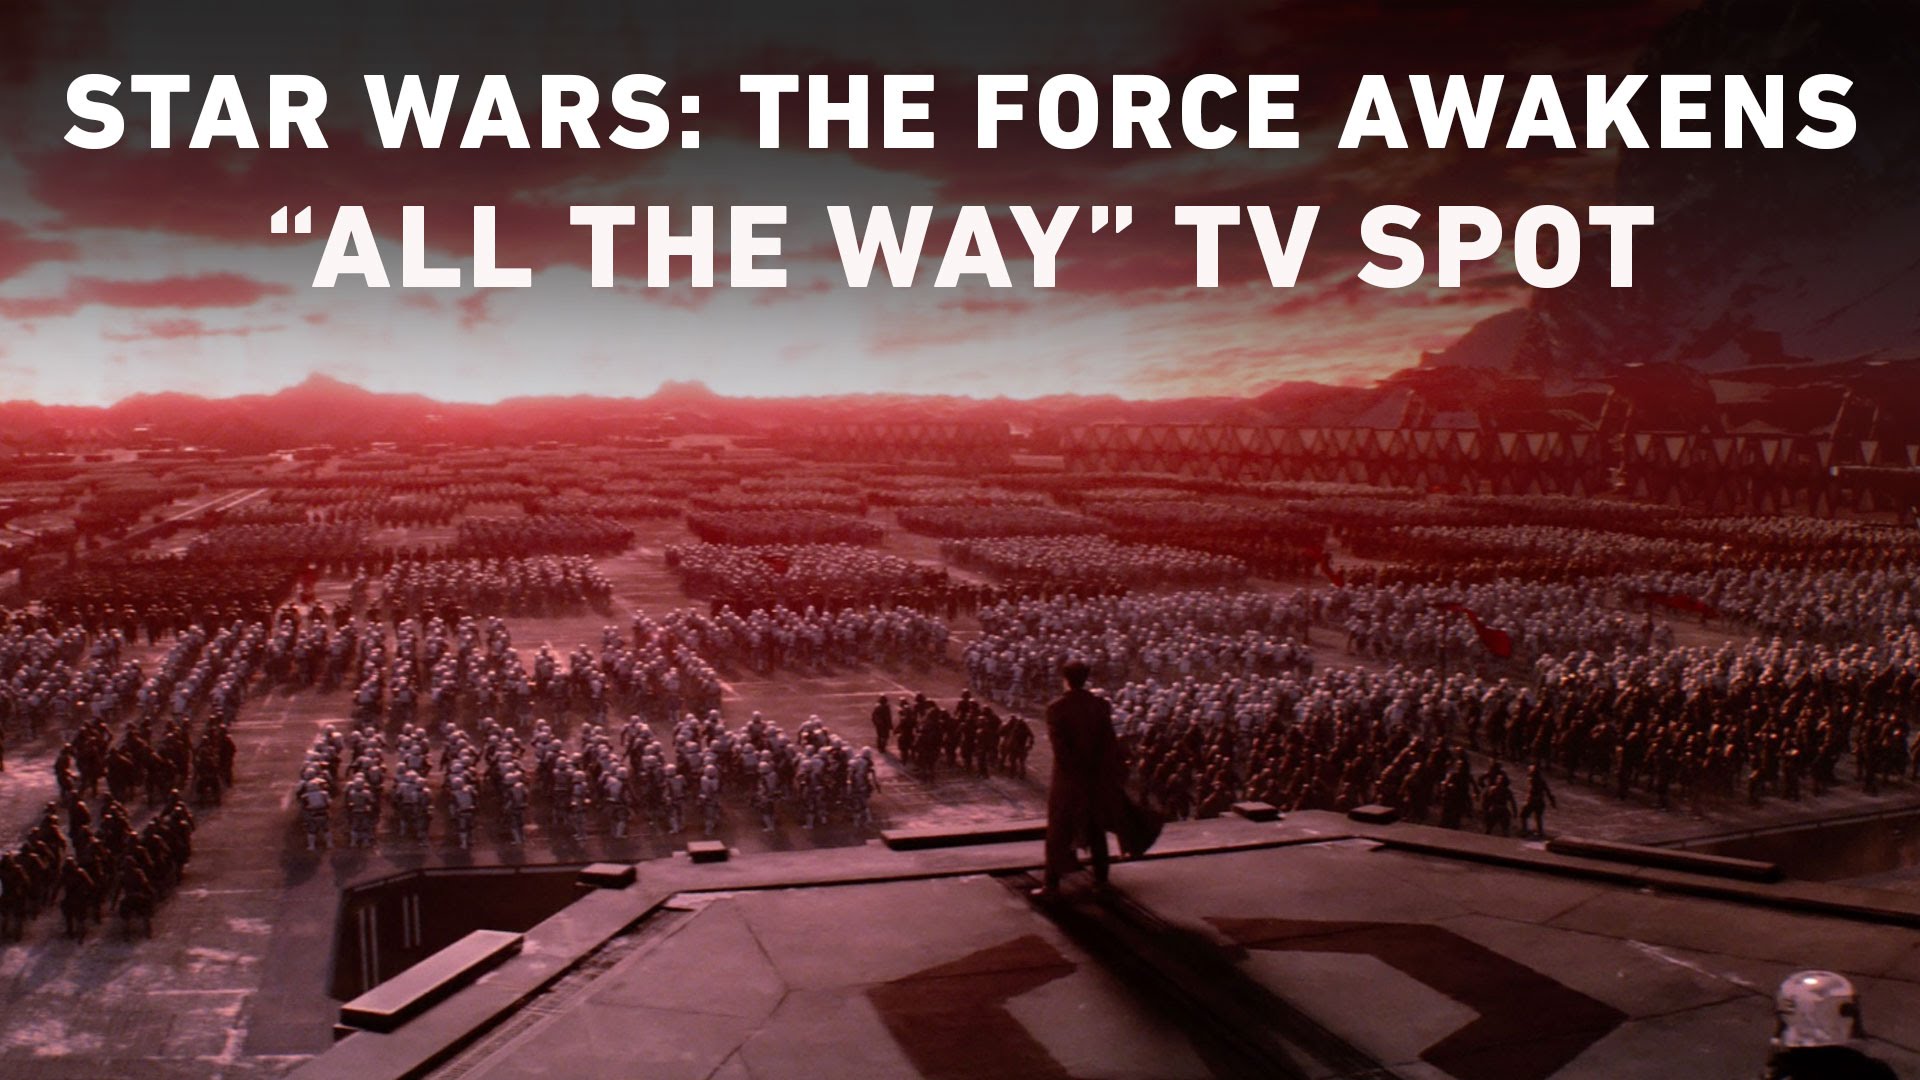 Star Wars: The Force Awakens “All the Way” TV Spot